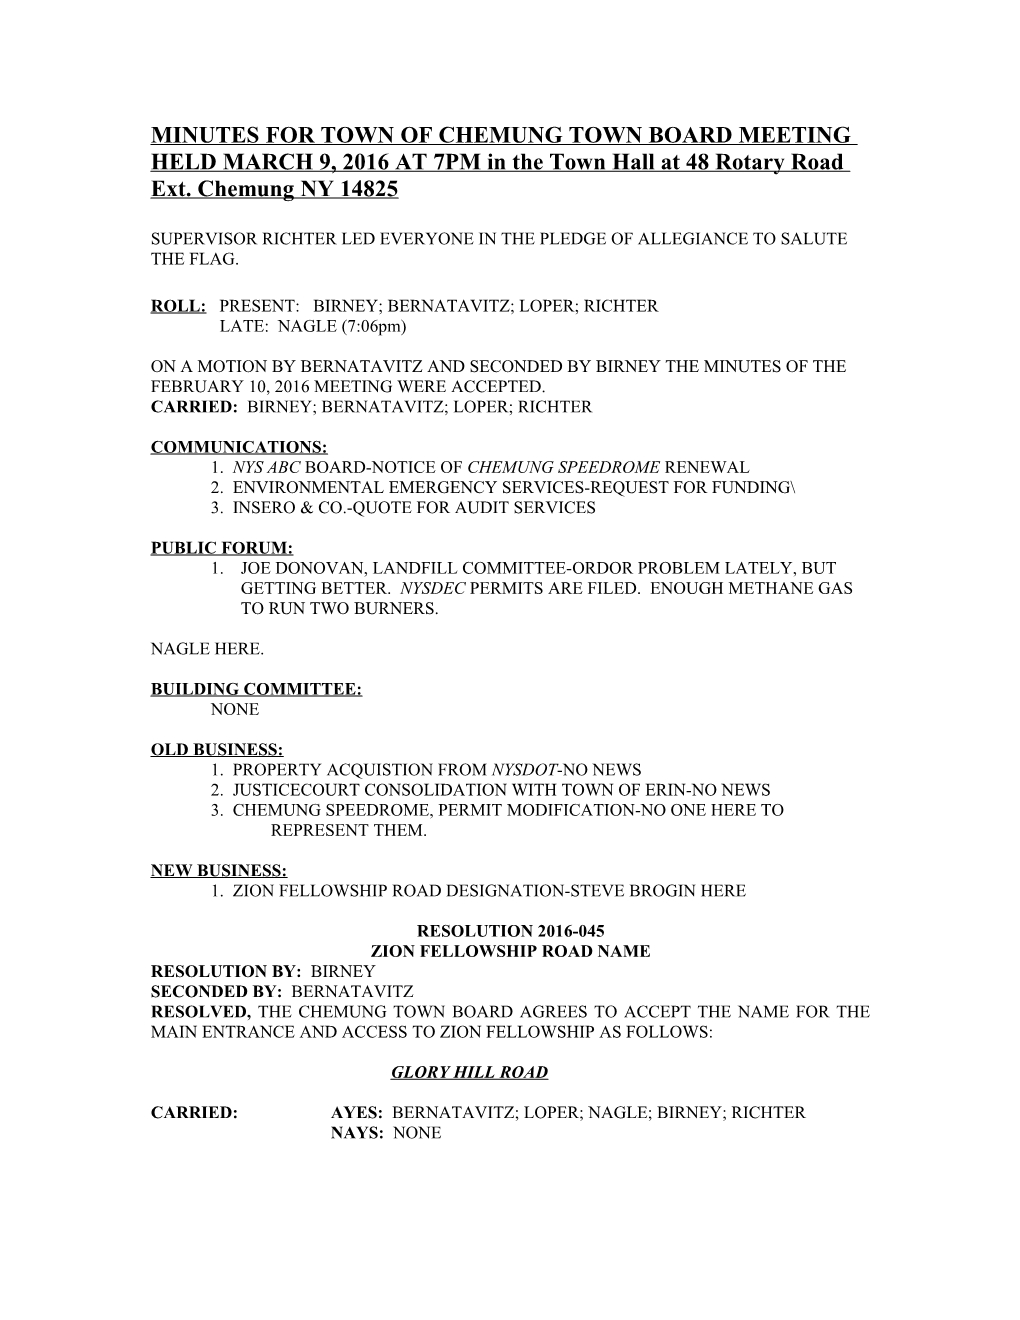 MINUTES for TOWN of CHEMUNG TOWN BOARD MEETING HELD on JULY 10, 2013 at 7PM in the Town s4